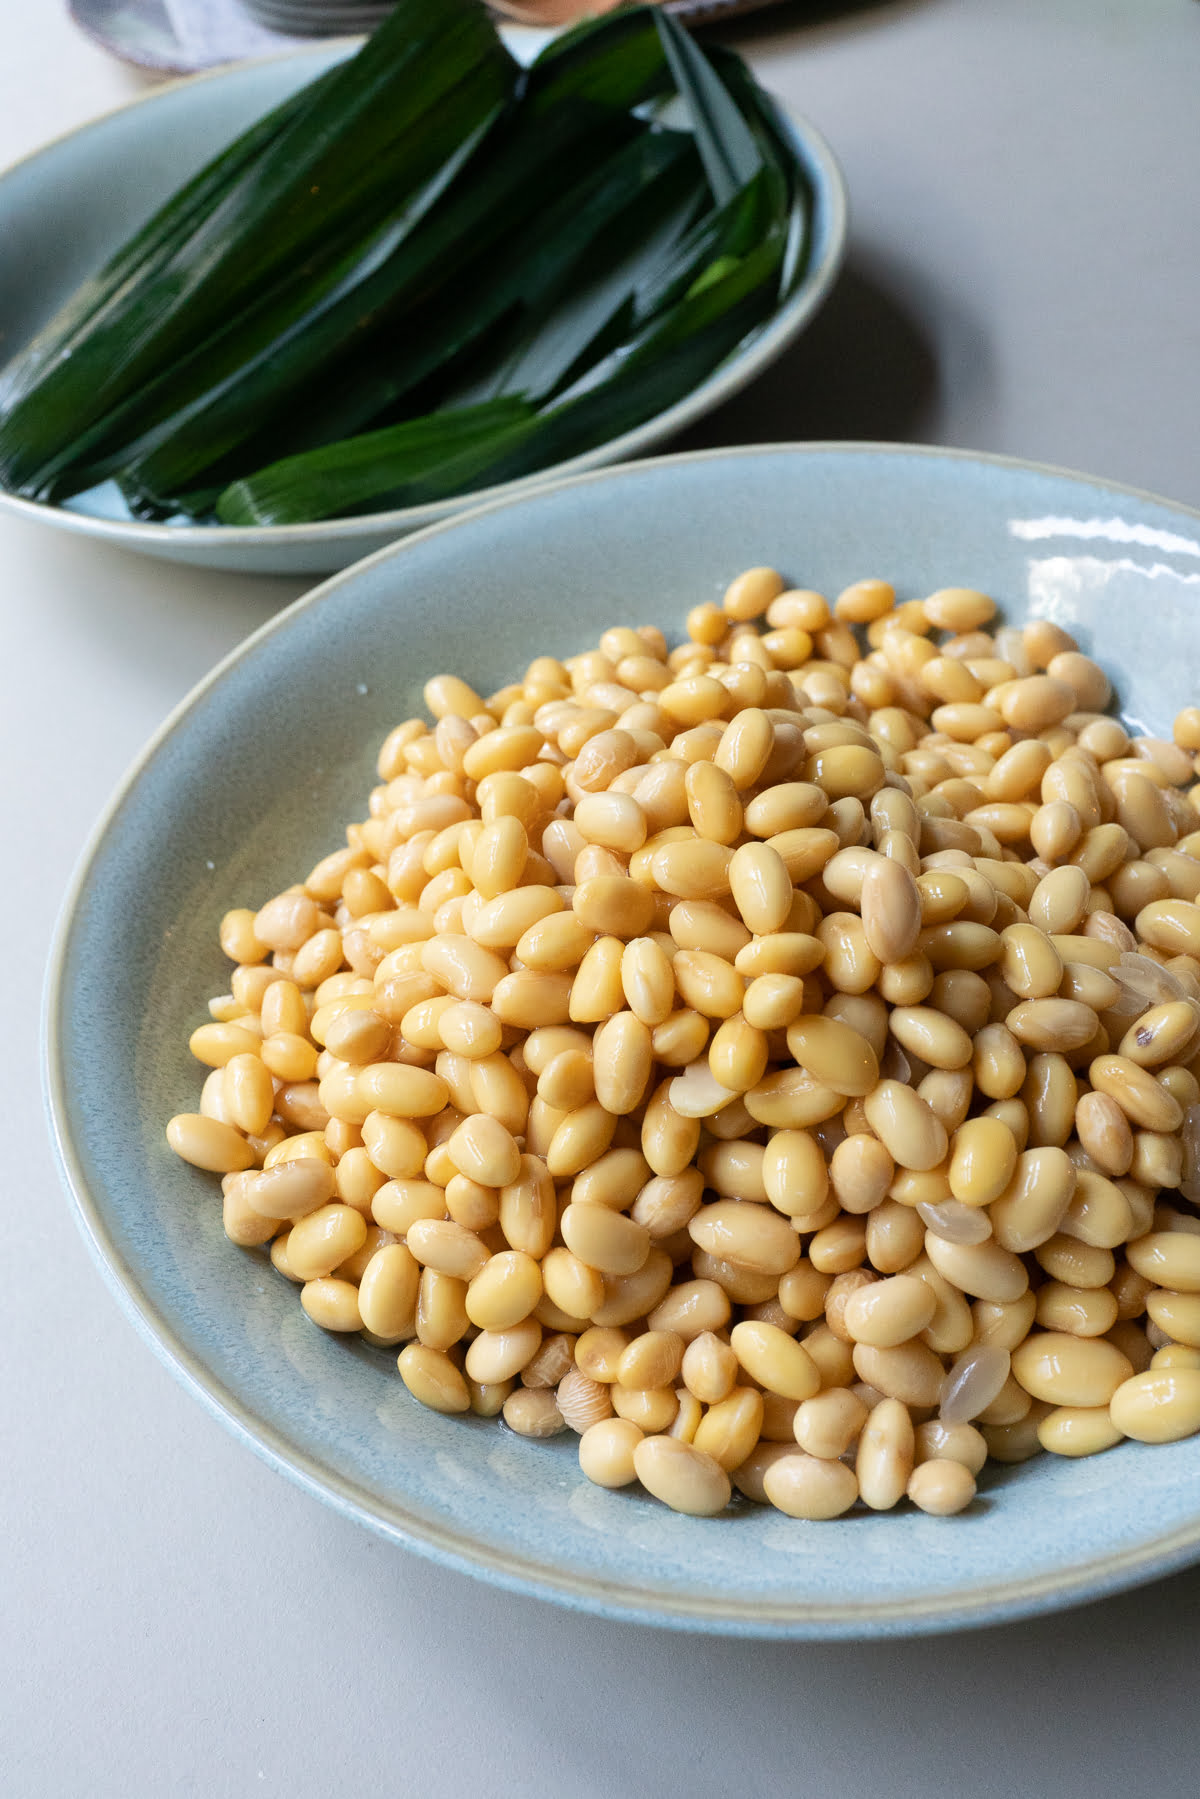 A plate of soybeans and pandan leaves.